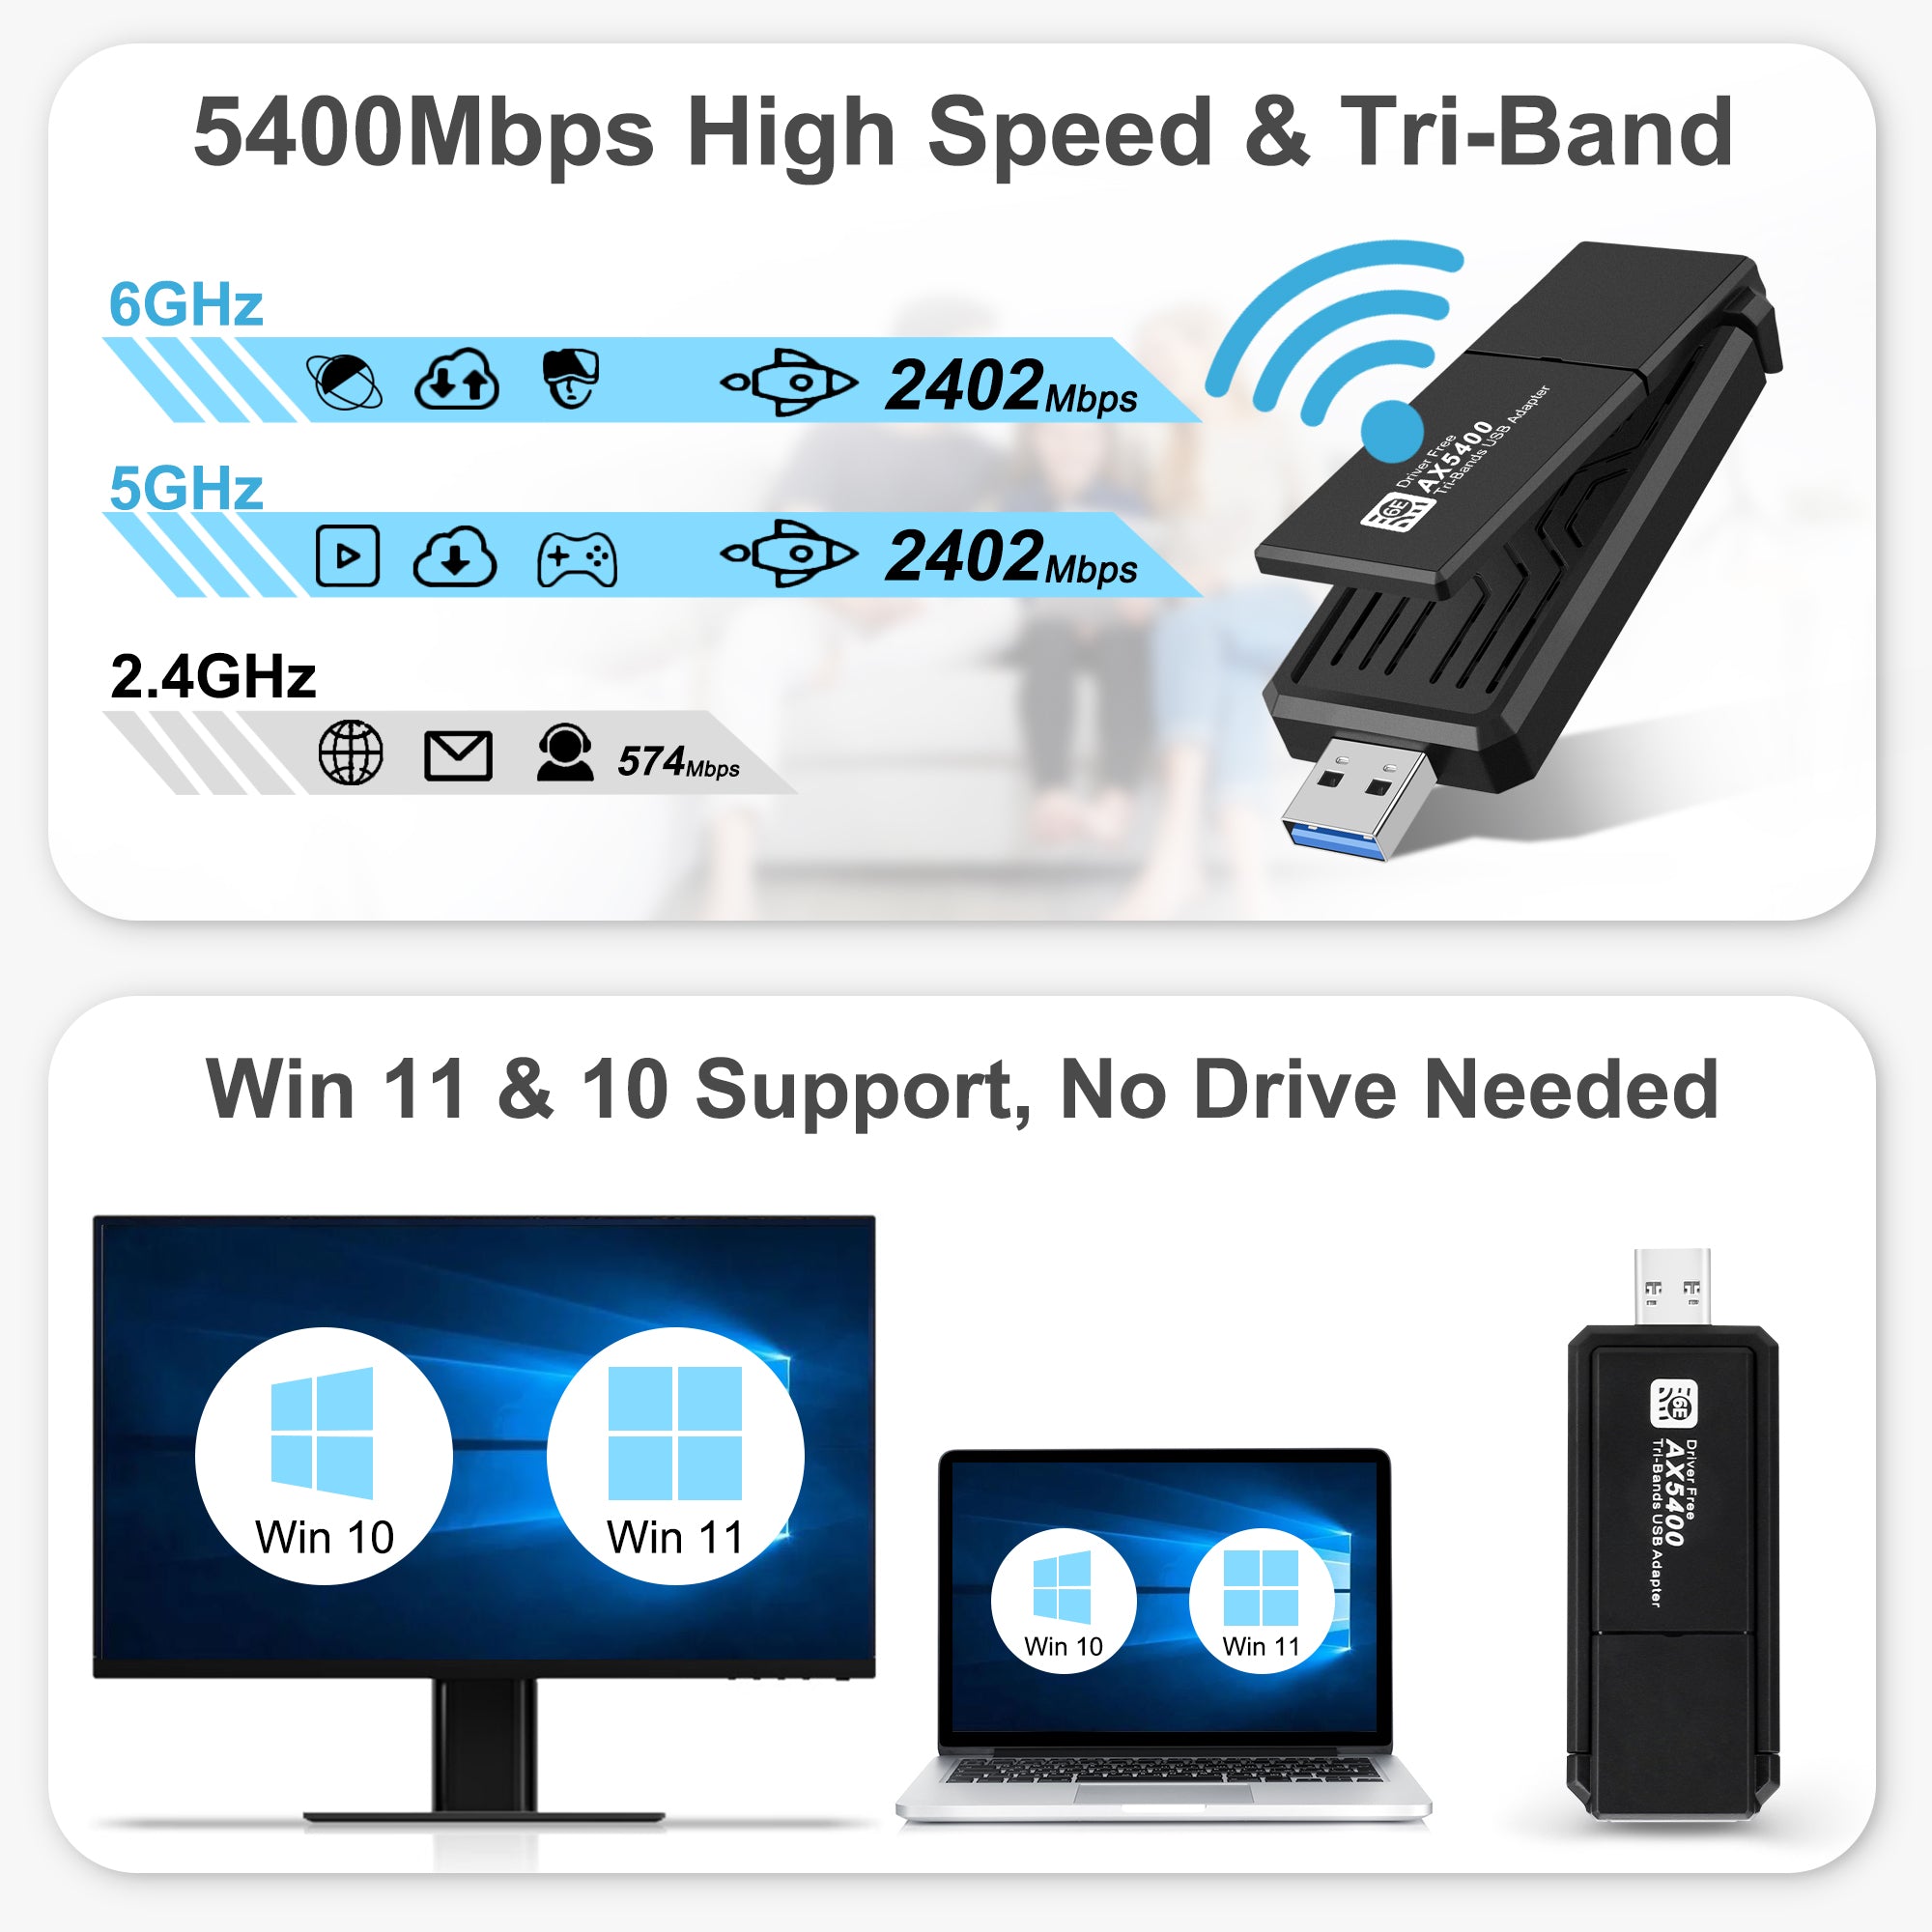 AX5400 WiFi 6E USB Adapter for PC, Tri-Band 6GHz/5GHz/2.4GHz, WPA3, Windows 11/10 Compatible, Driver-Free